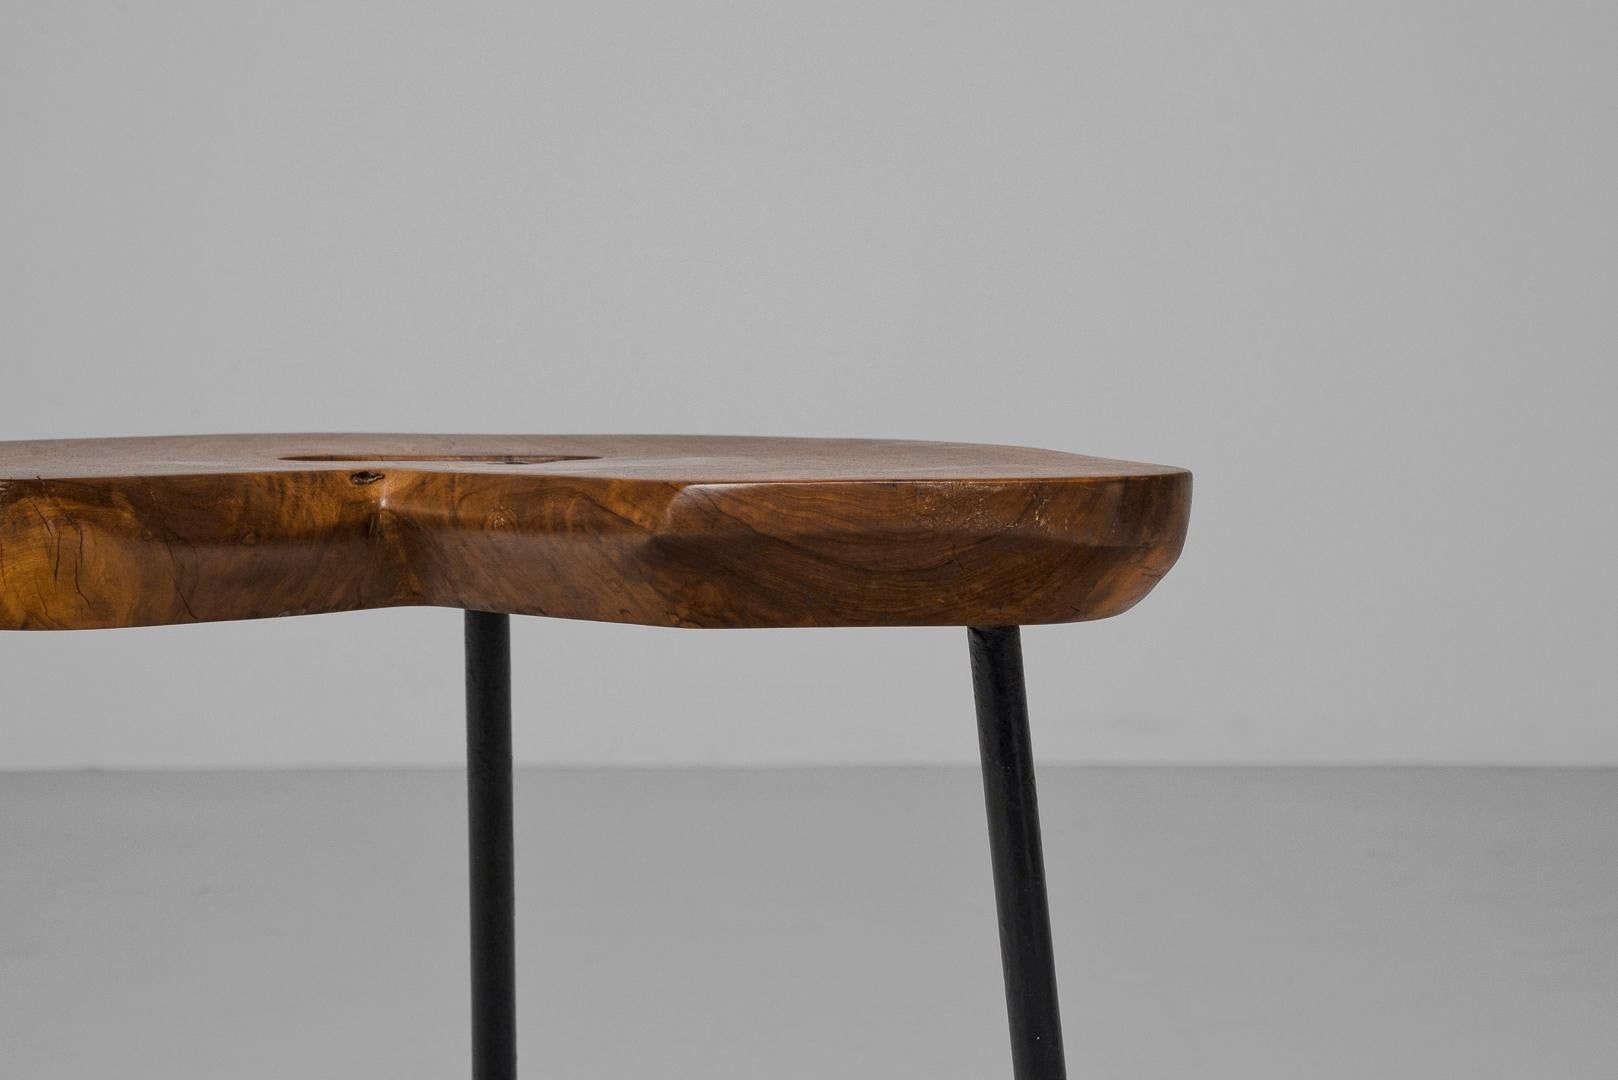 Beuatiful Forme libre stool in elmwood made in France in 1950. A gorgeous wooden seat inspired by Carl Aubock. It's made of solid elm wood with a beautiful grain pattern. The legs are strong steel, painted black for a modern touch. A great feature